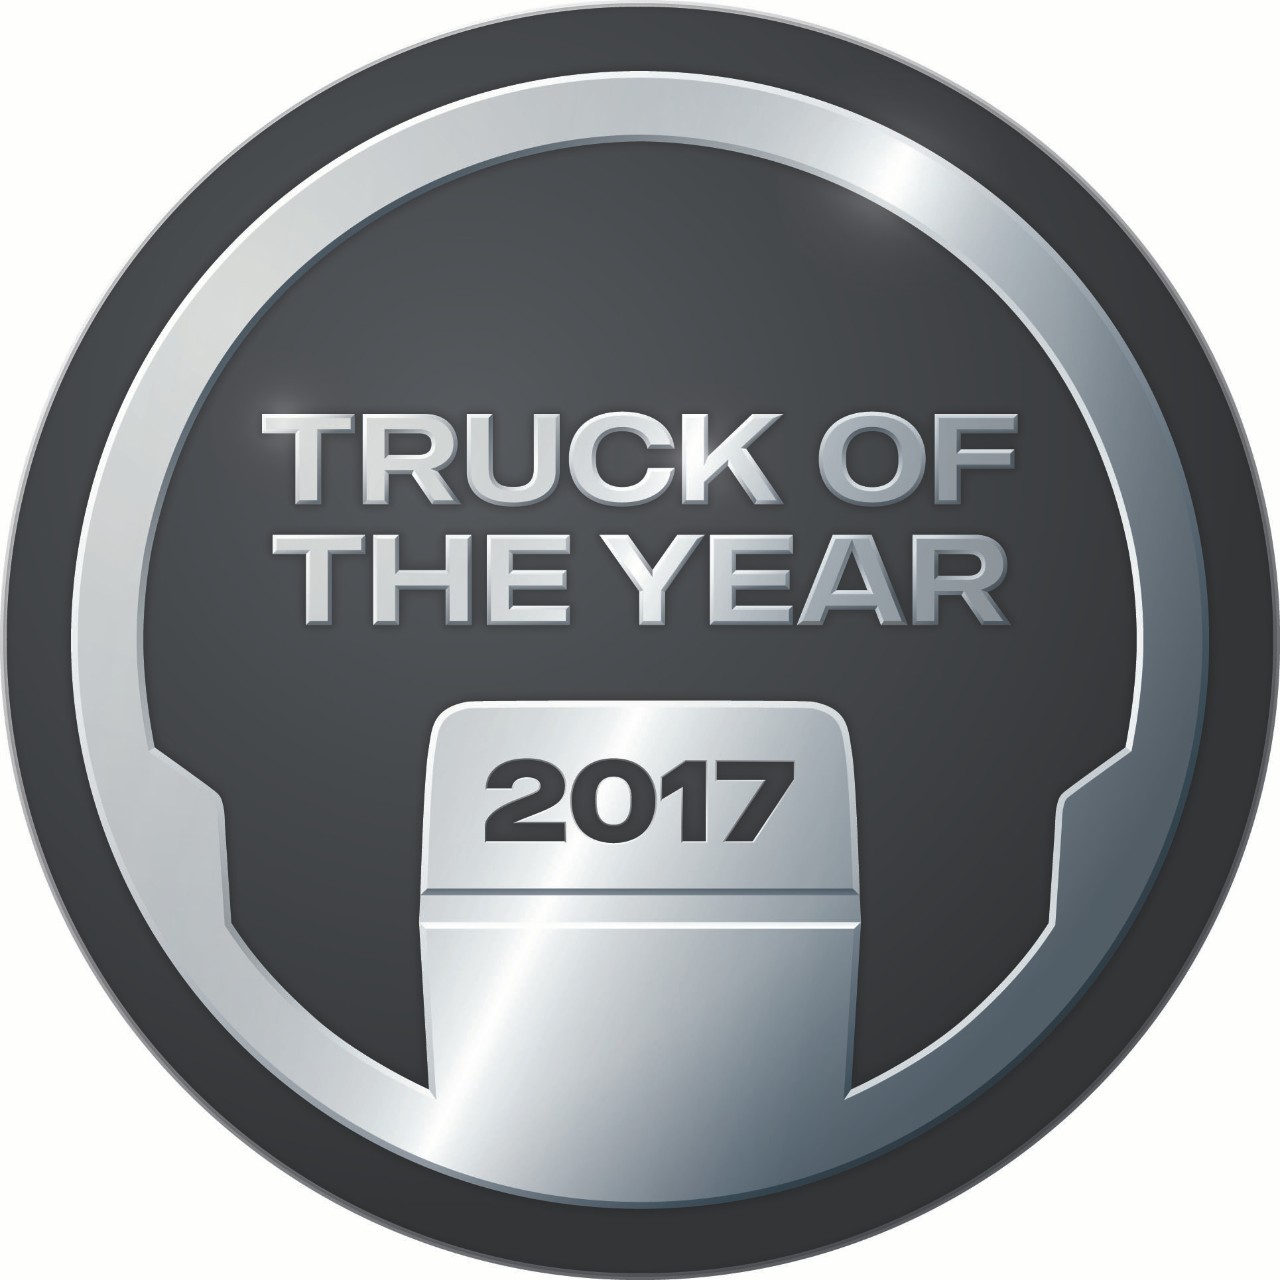 Truck of the year 2017